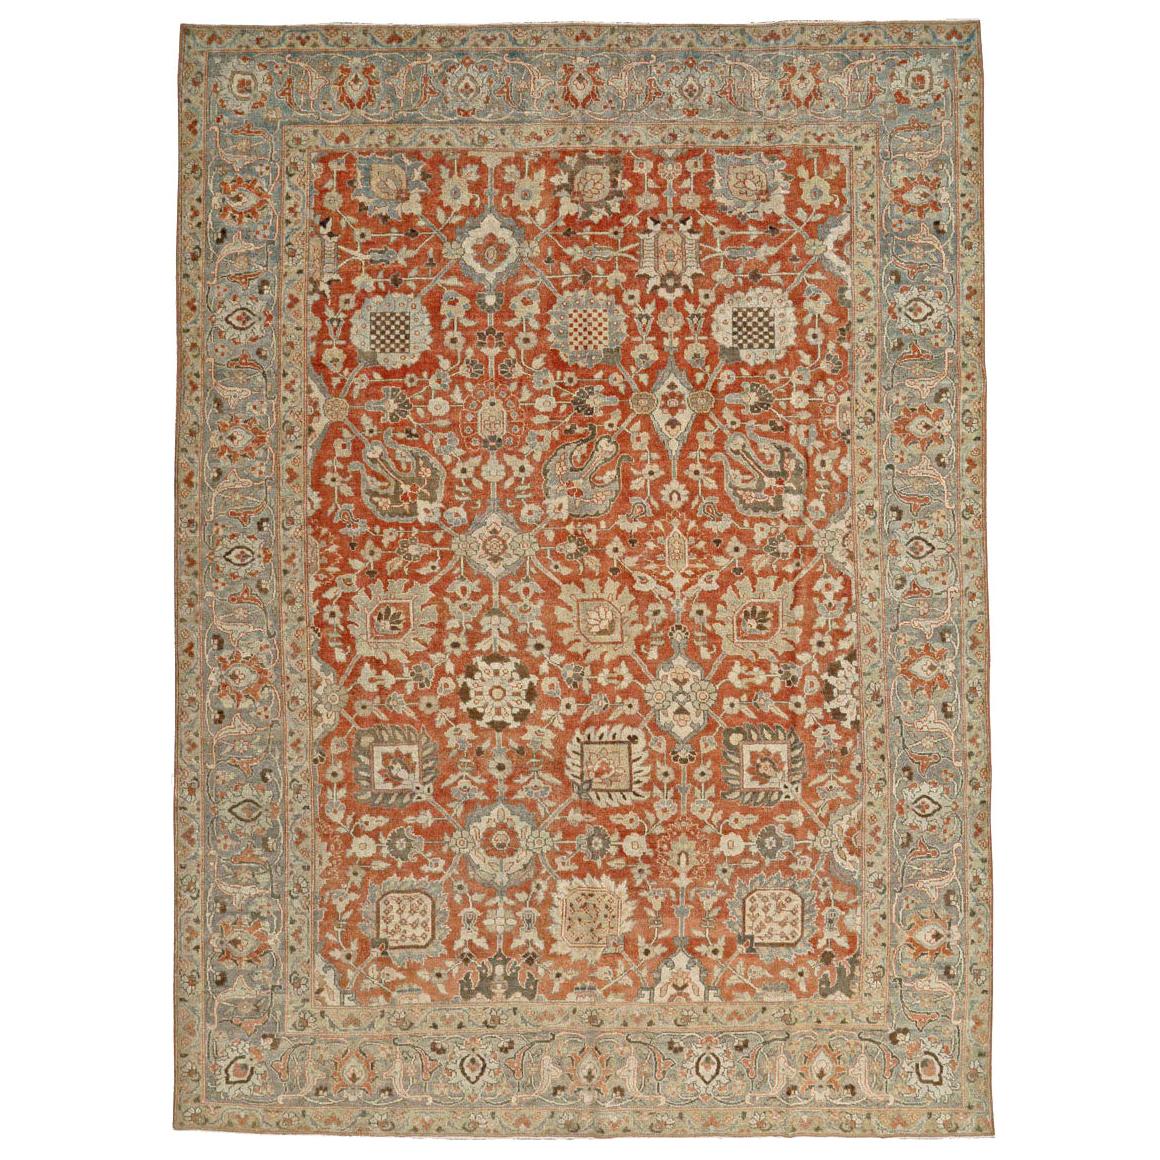 Early 20th Century Handmade Persian Tabriz Room Size Carpet in Rust and Grey